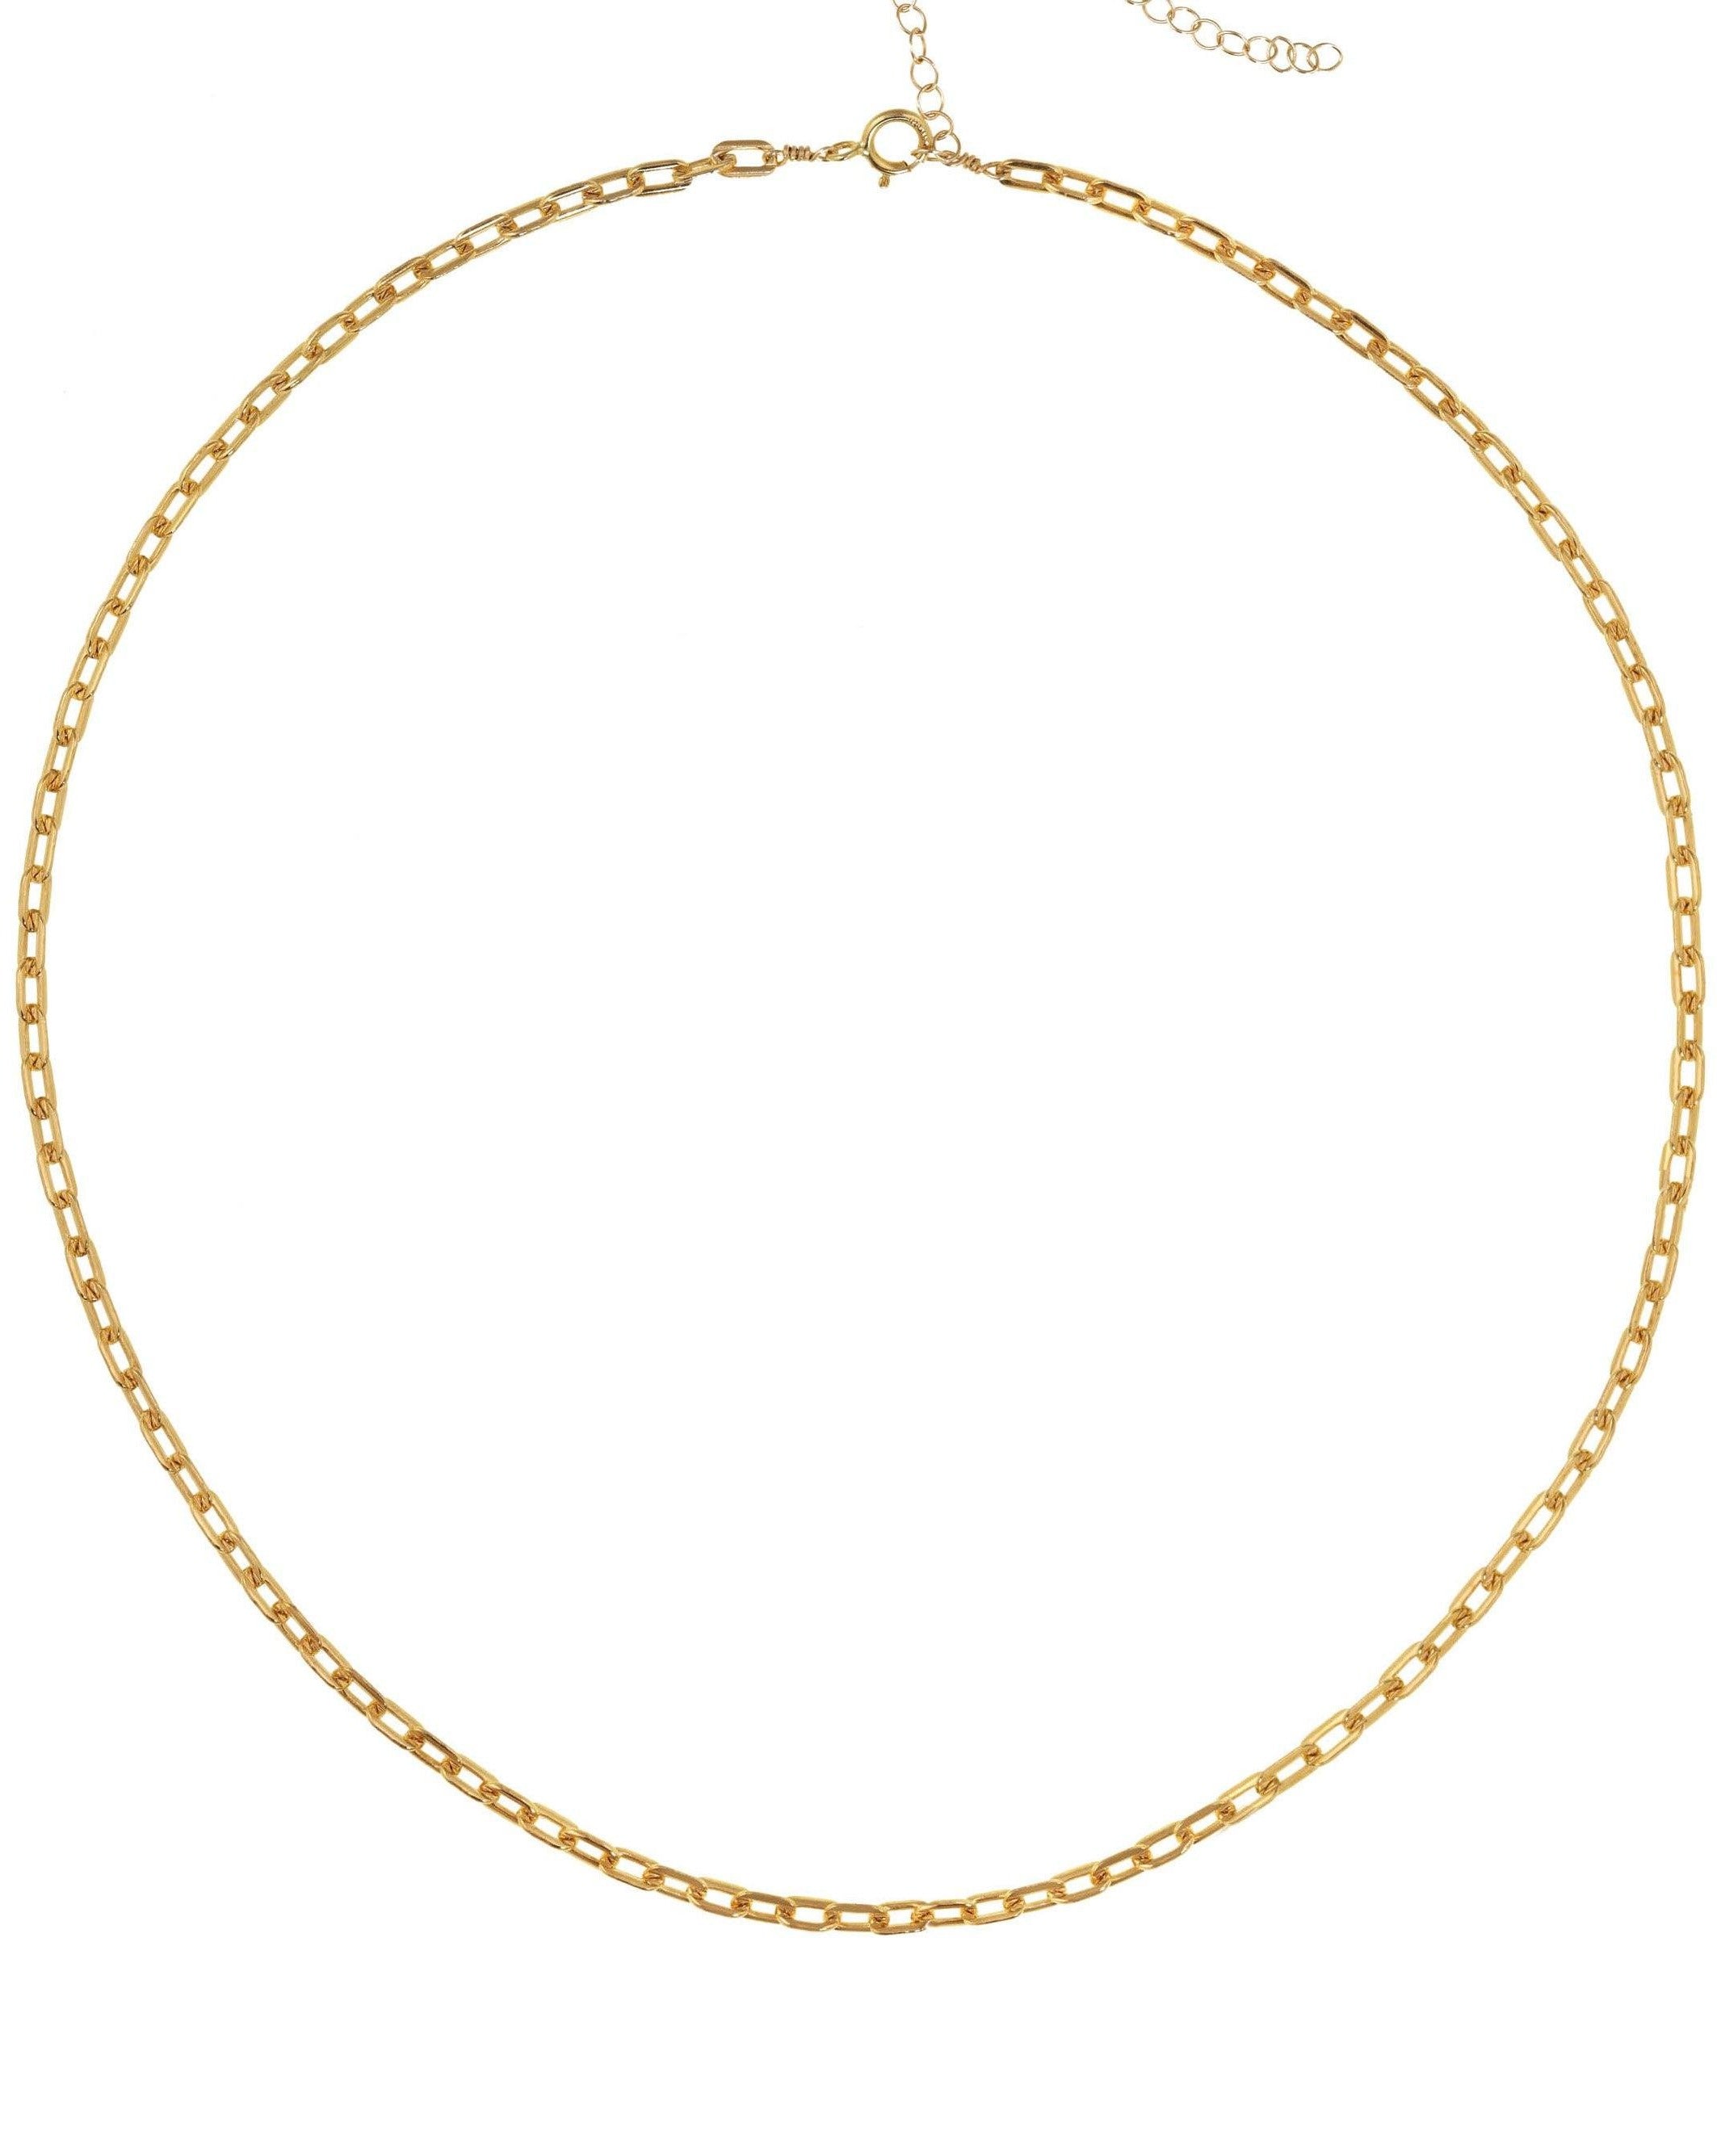 Garla Necklace by KOZAKH. A 14 to 16 inch adjustable length necklace in 14K Gold Filled.